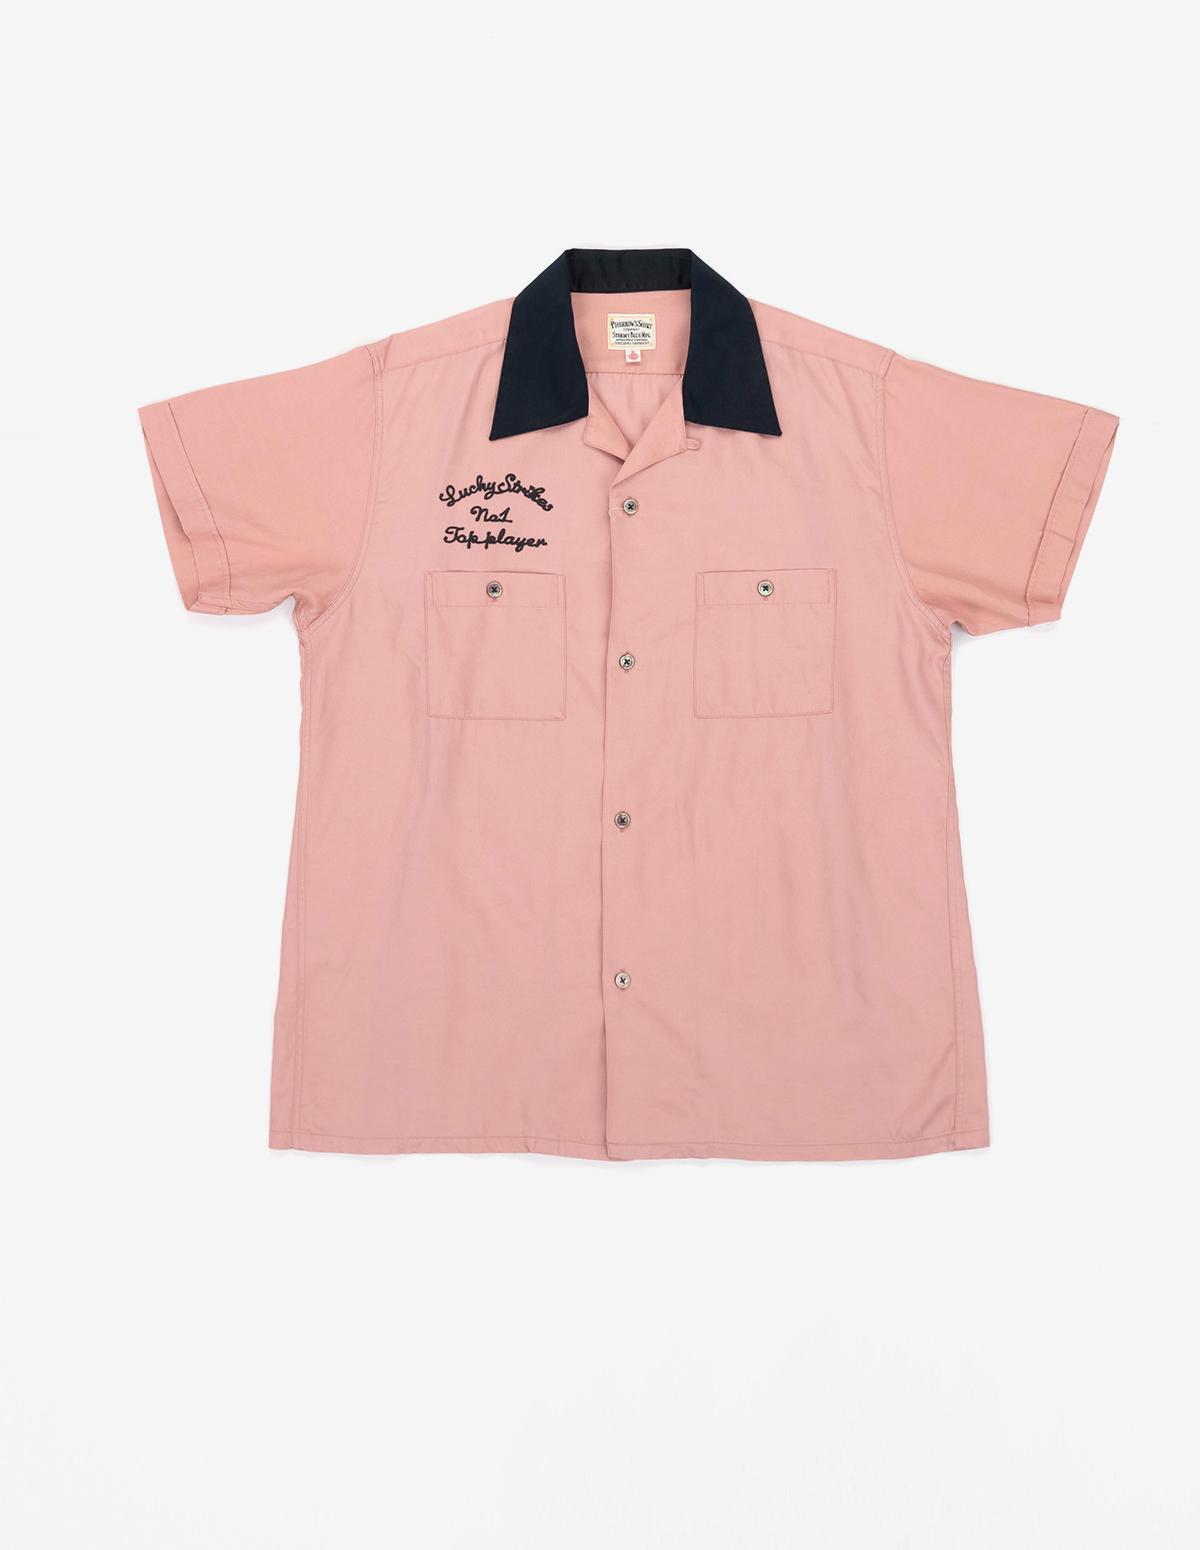 23S-PBS1 Lucky Strikes Bowling Shirts (Pink)